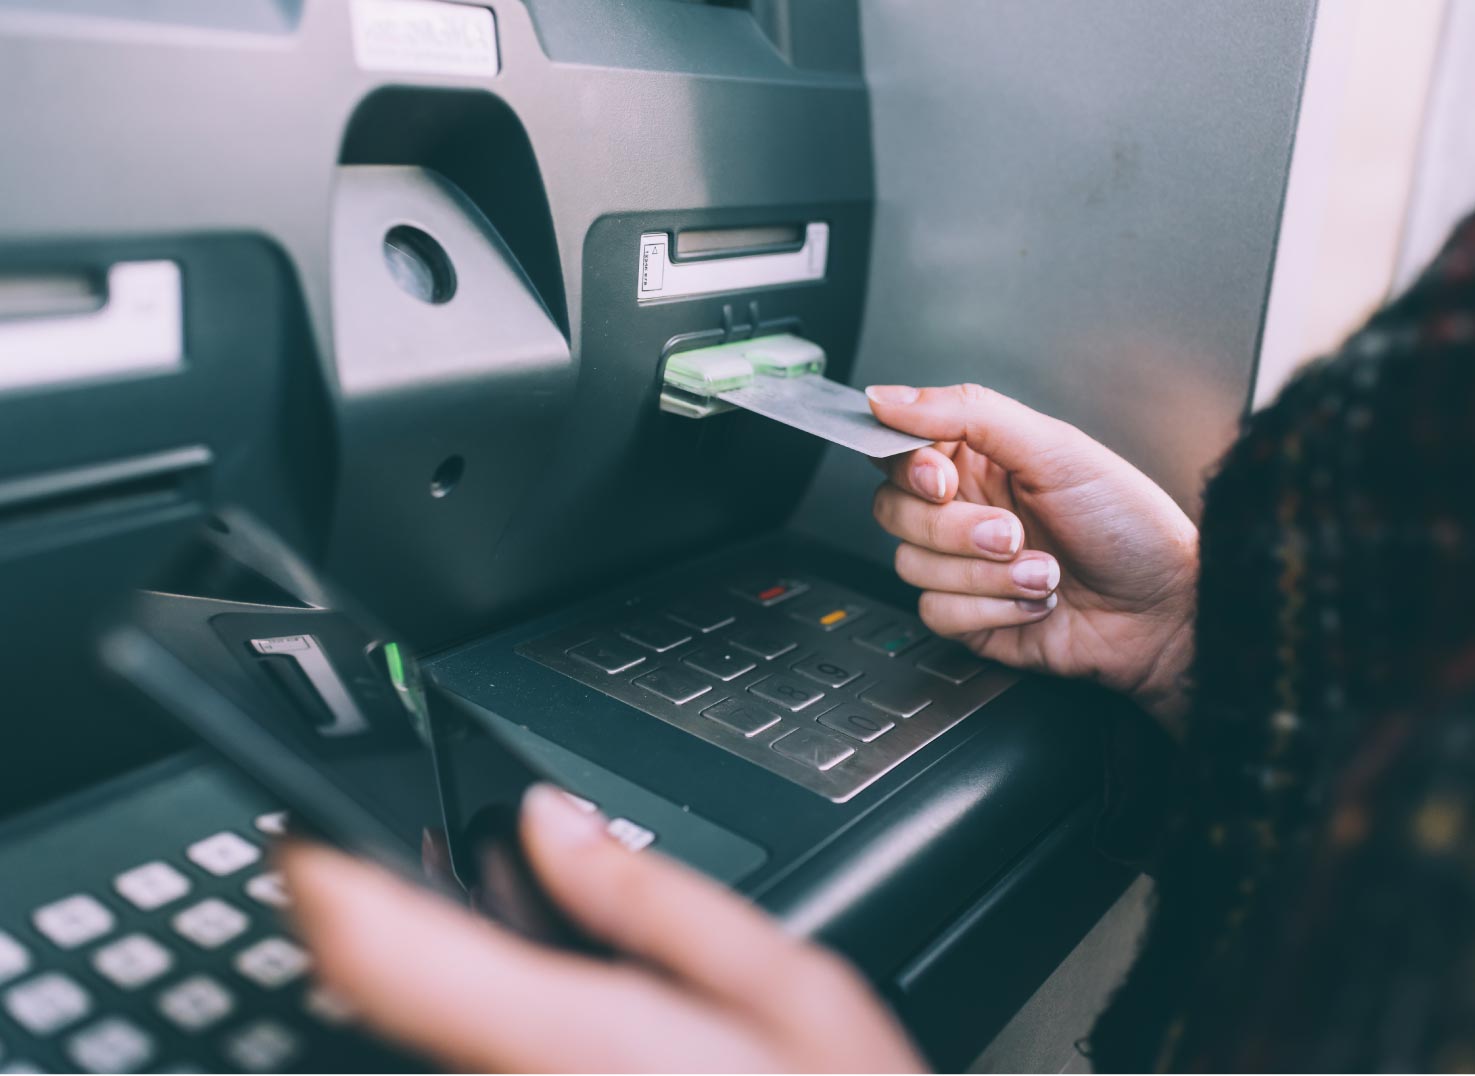 An Automated Teller Machine (ATM) is a banking terminal that makes it convenient to manage a bank account holder's funds.